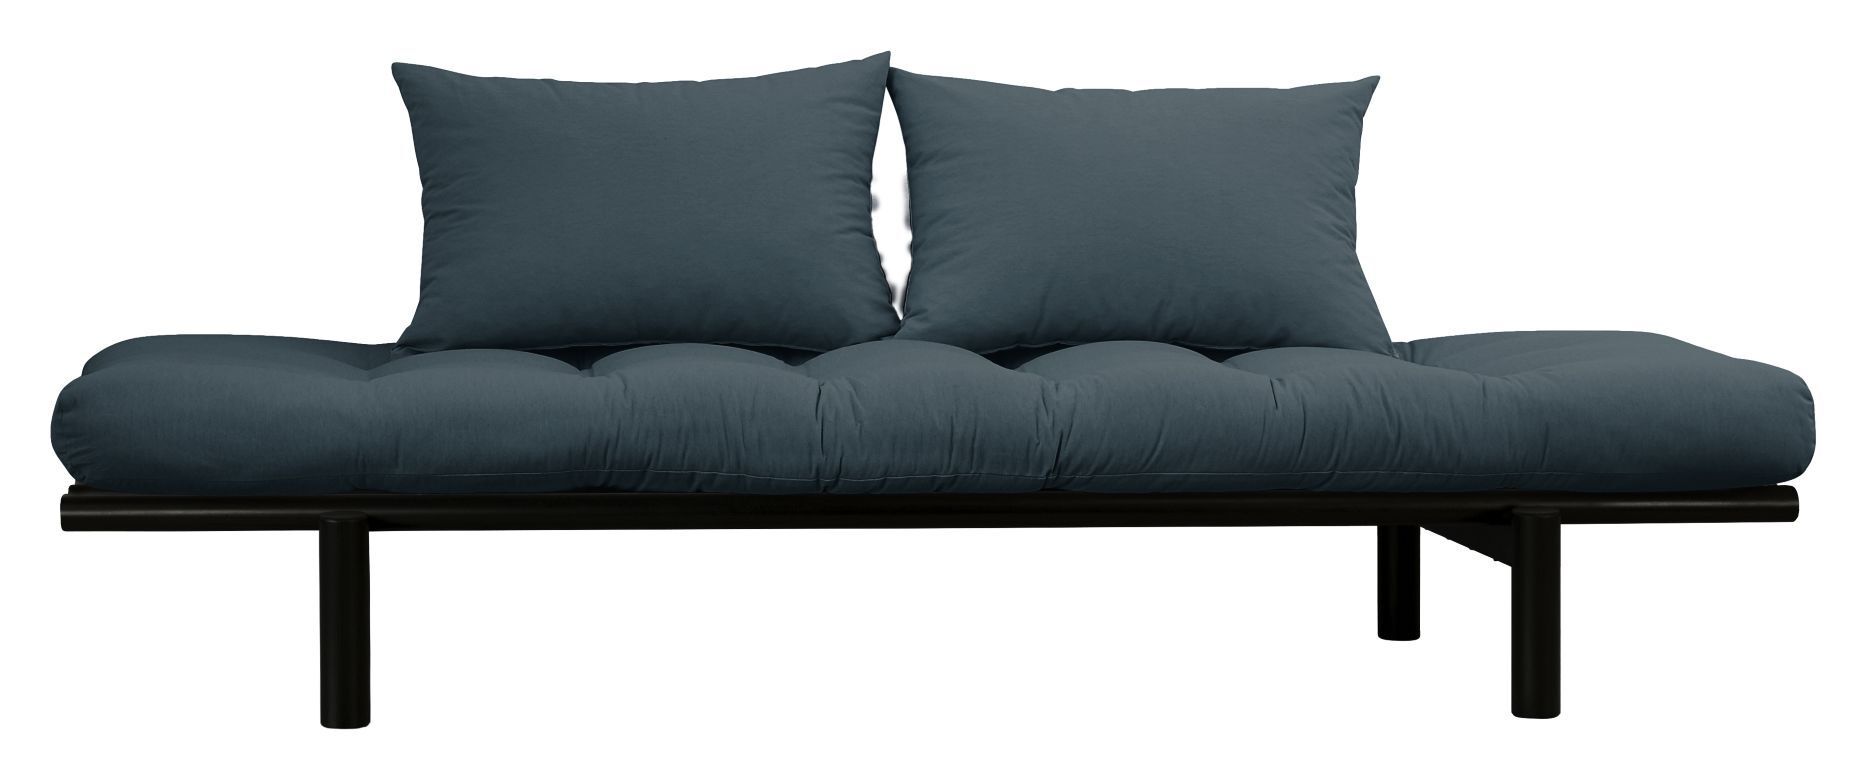 Karup Design Pace Daybed, Petrolium/Sort   Unoliving